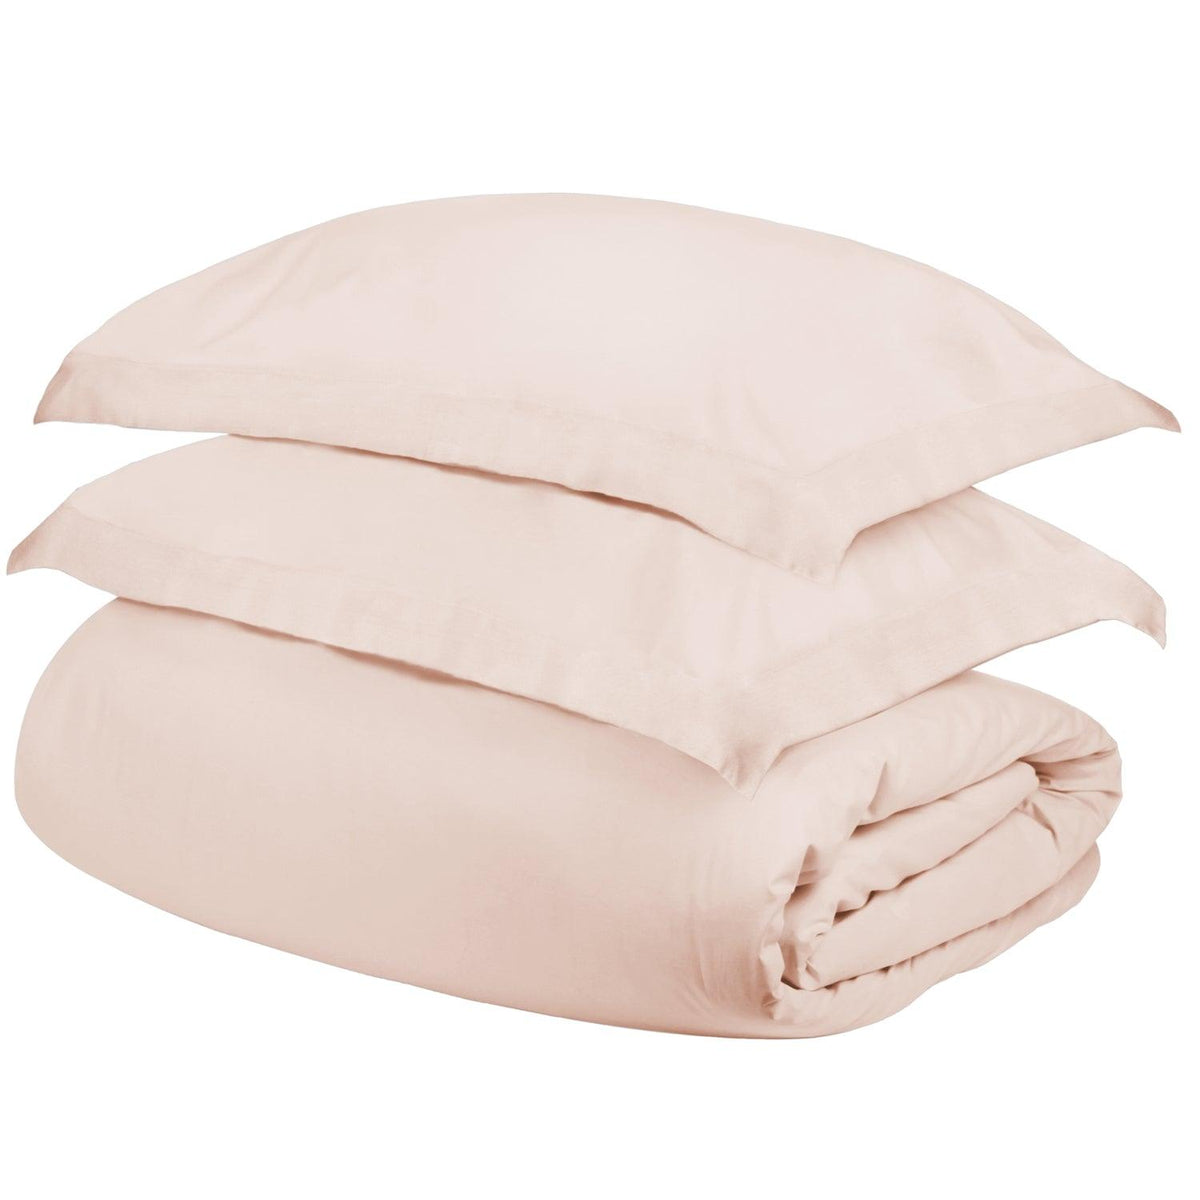  Superior Egyptian Cotton 400 Thread Count Solid Duvet Cover Set - Pink